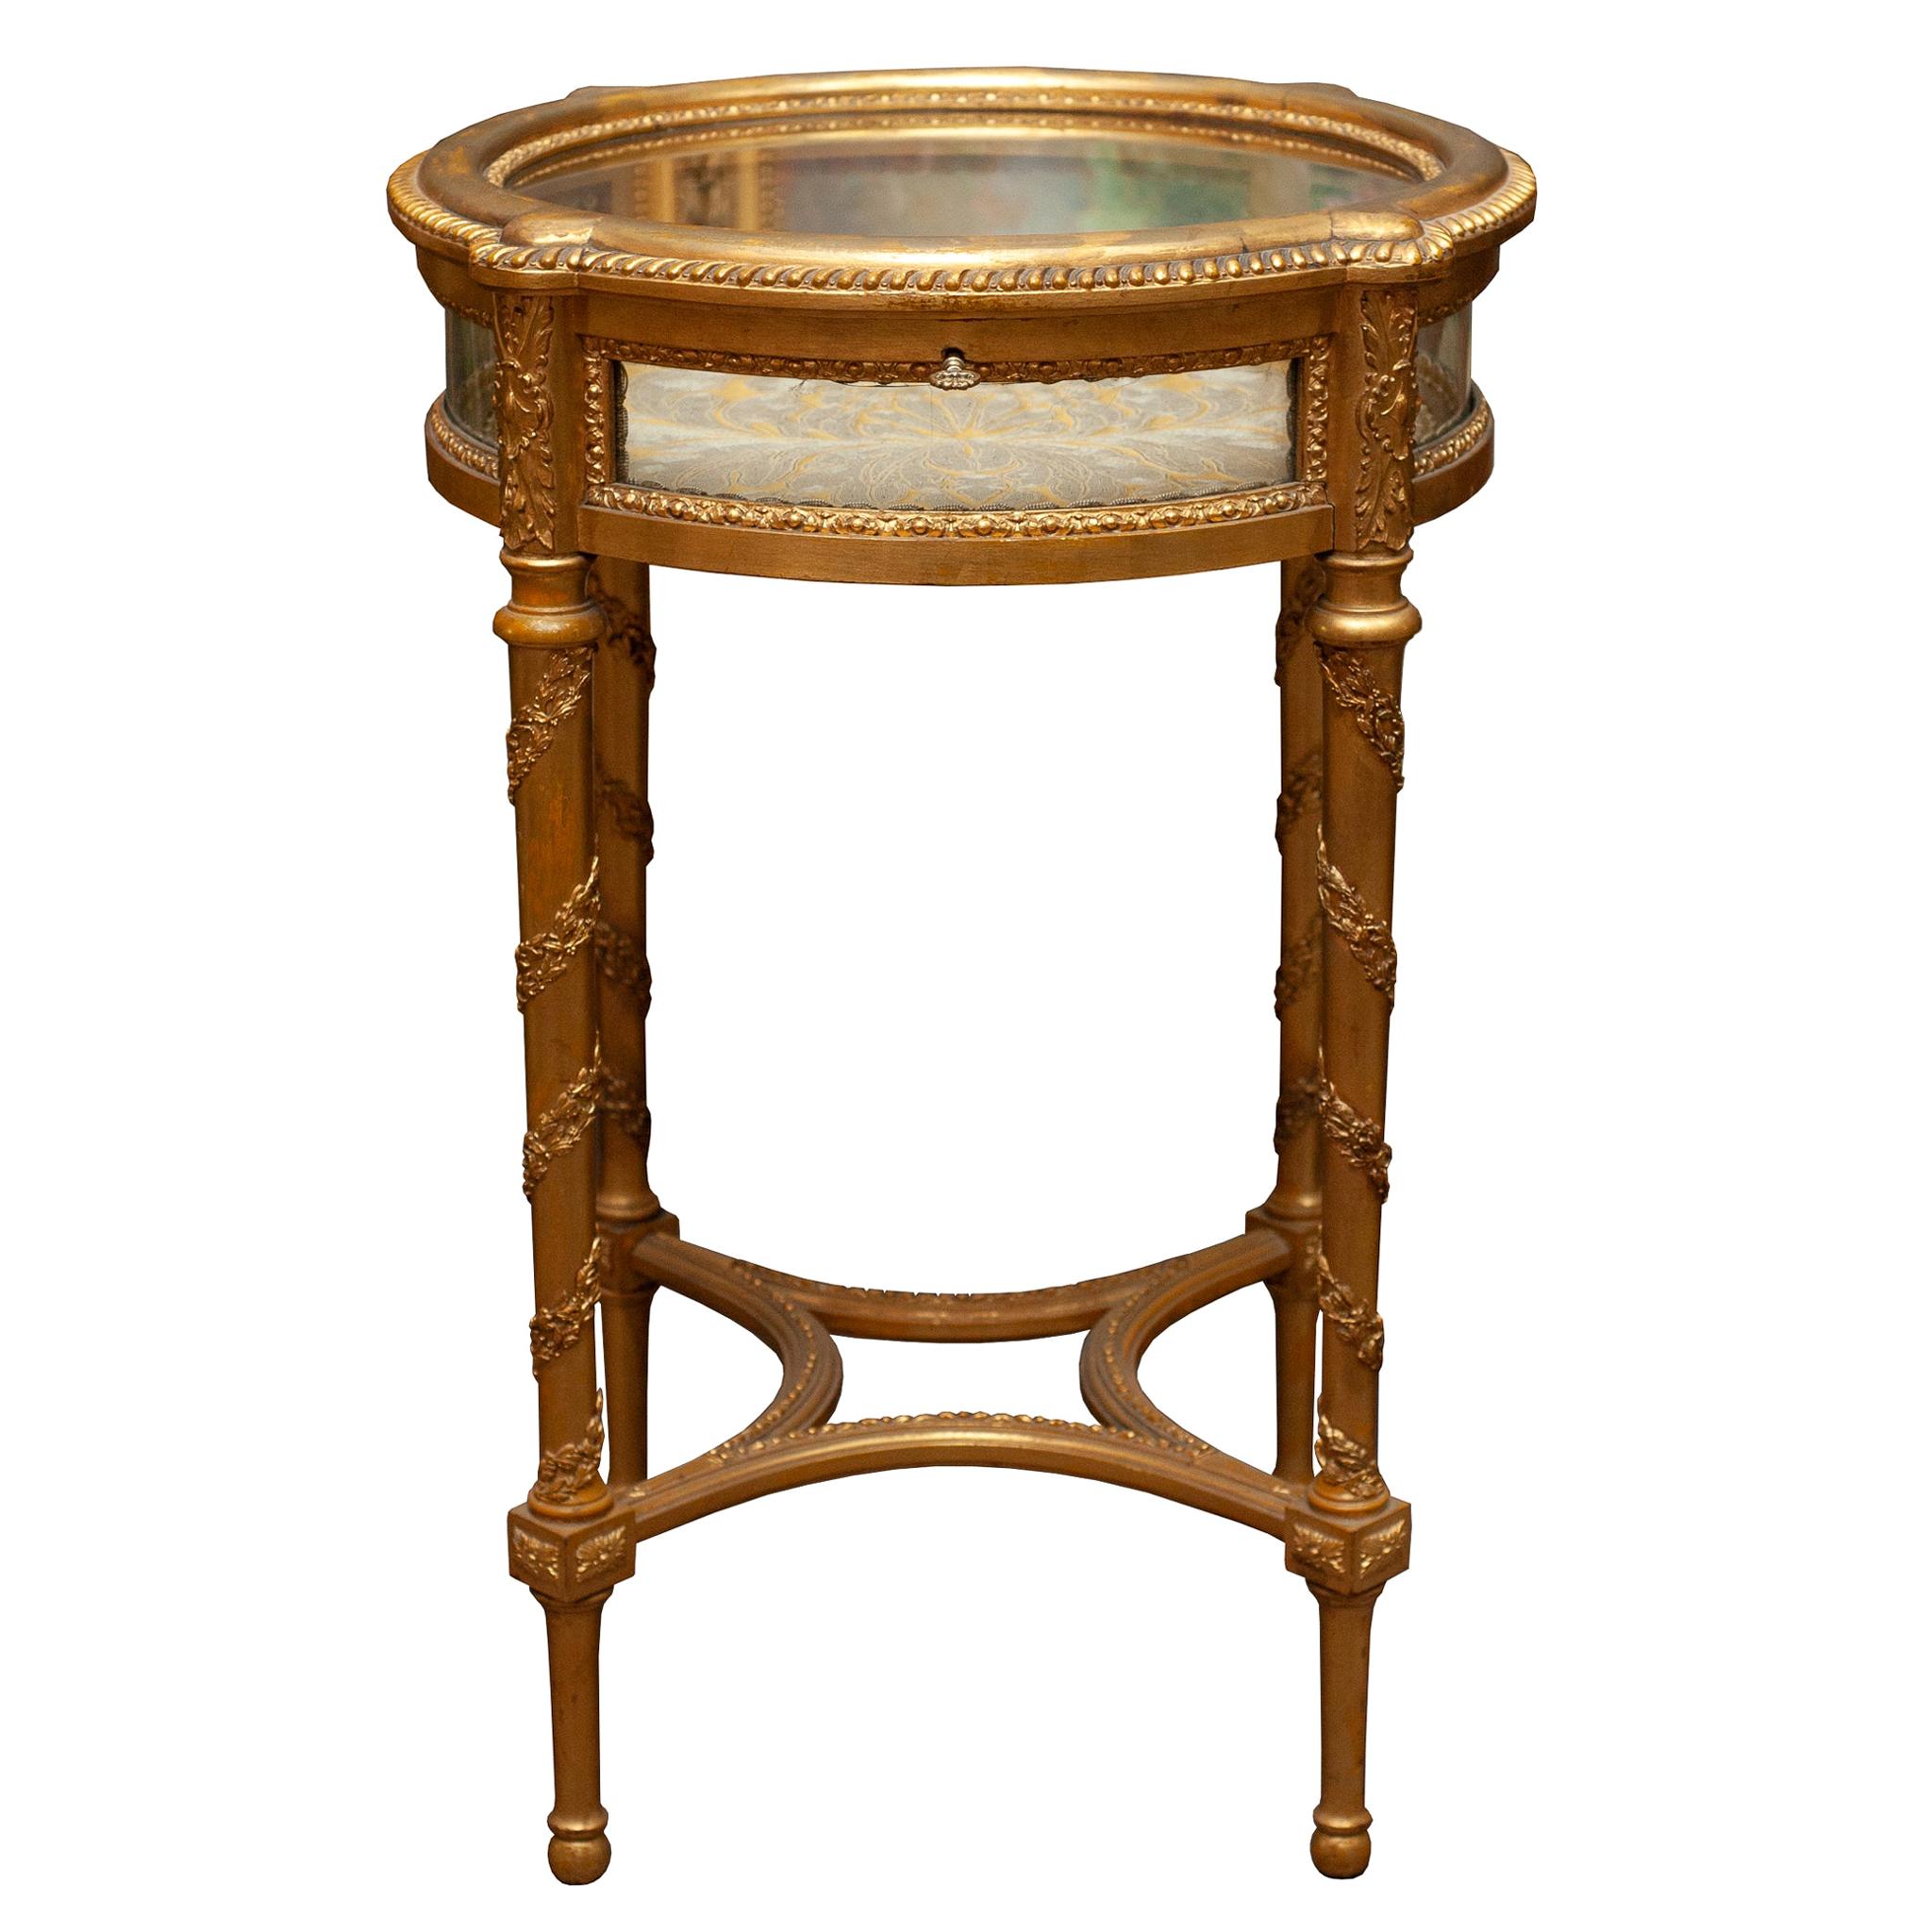 Antique French Round Hand-Carved and Gilded Display Table